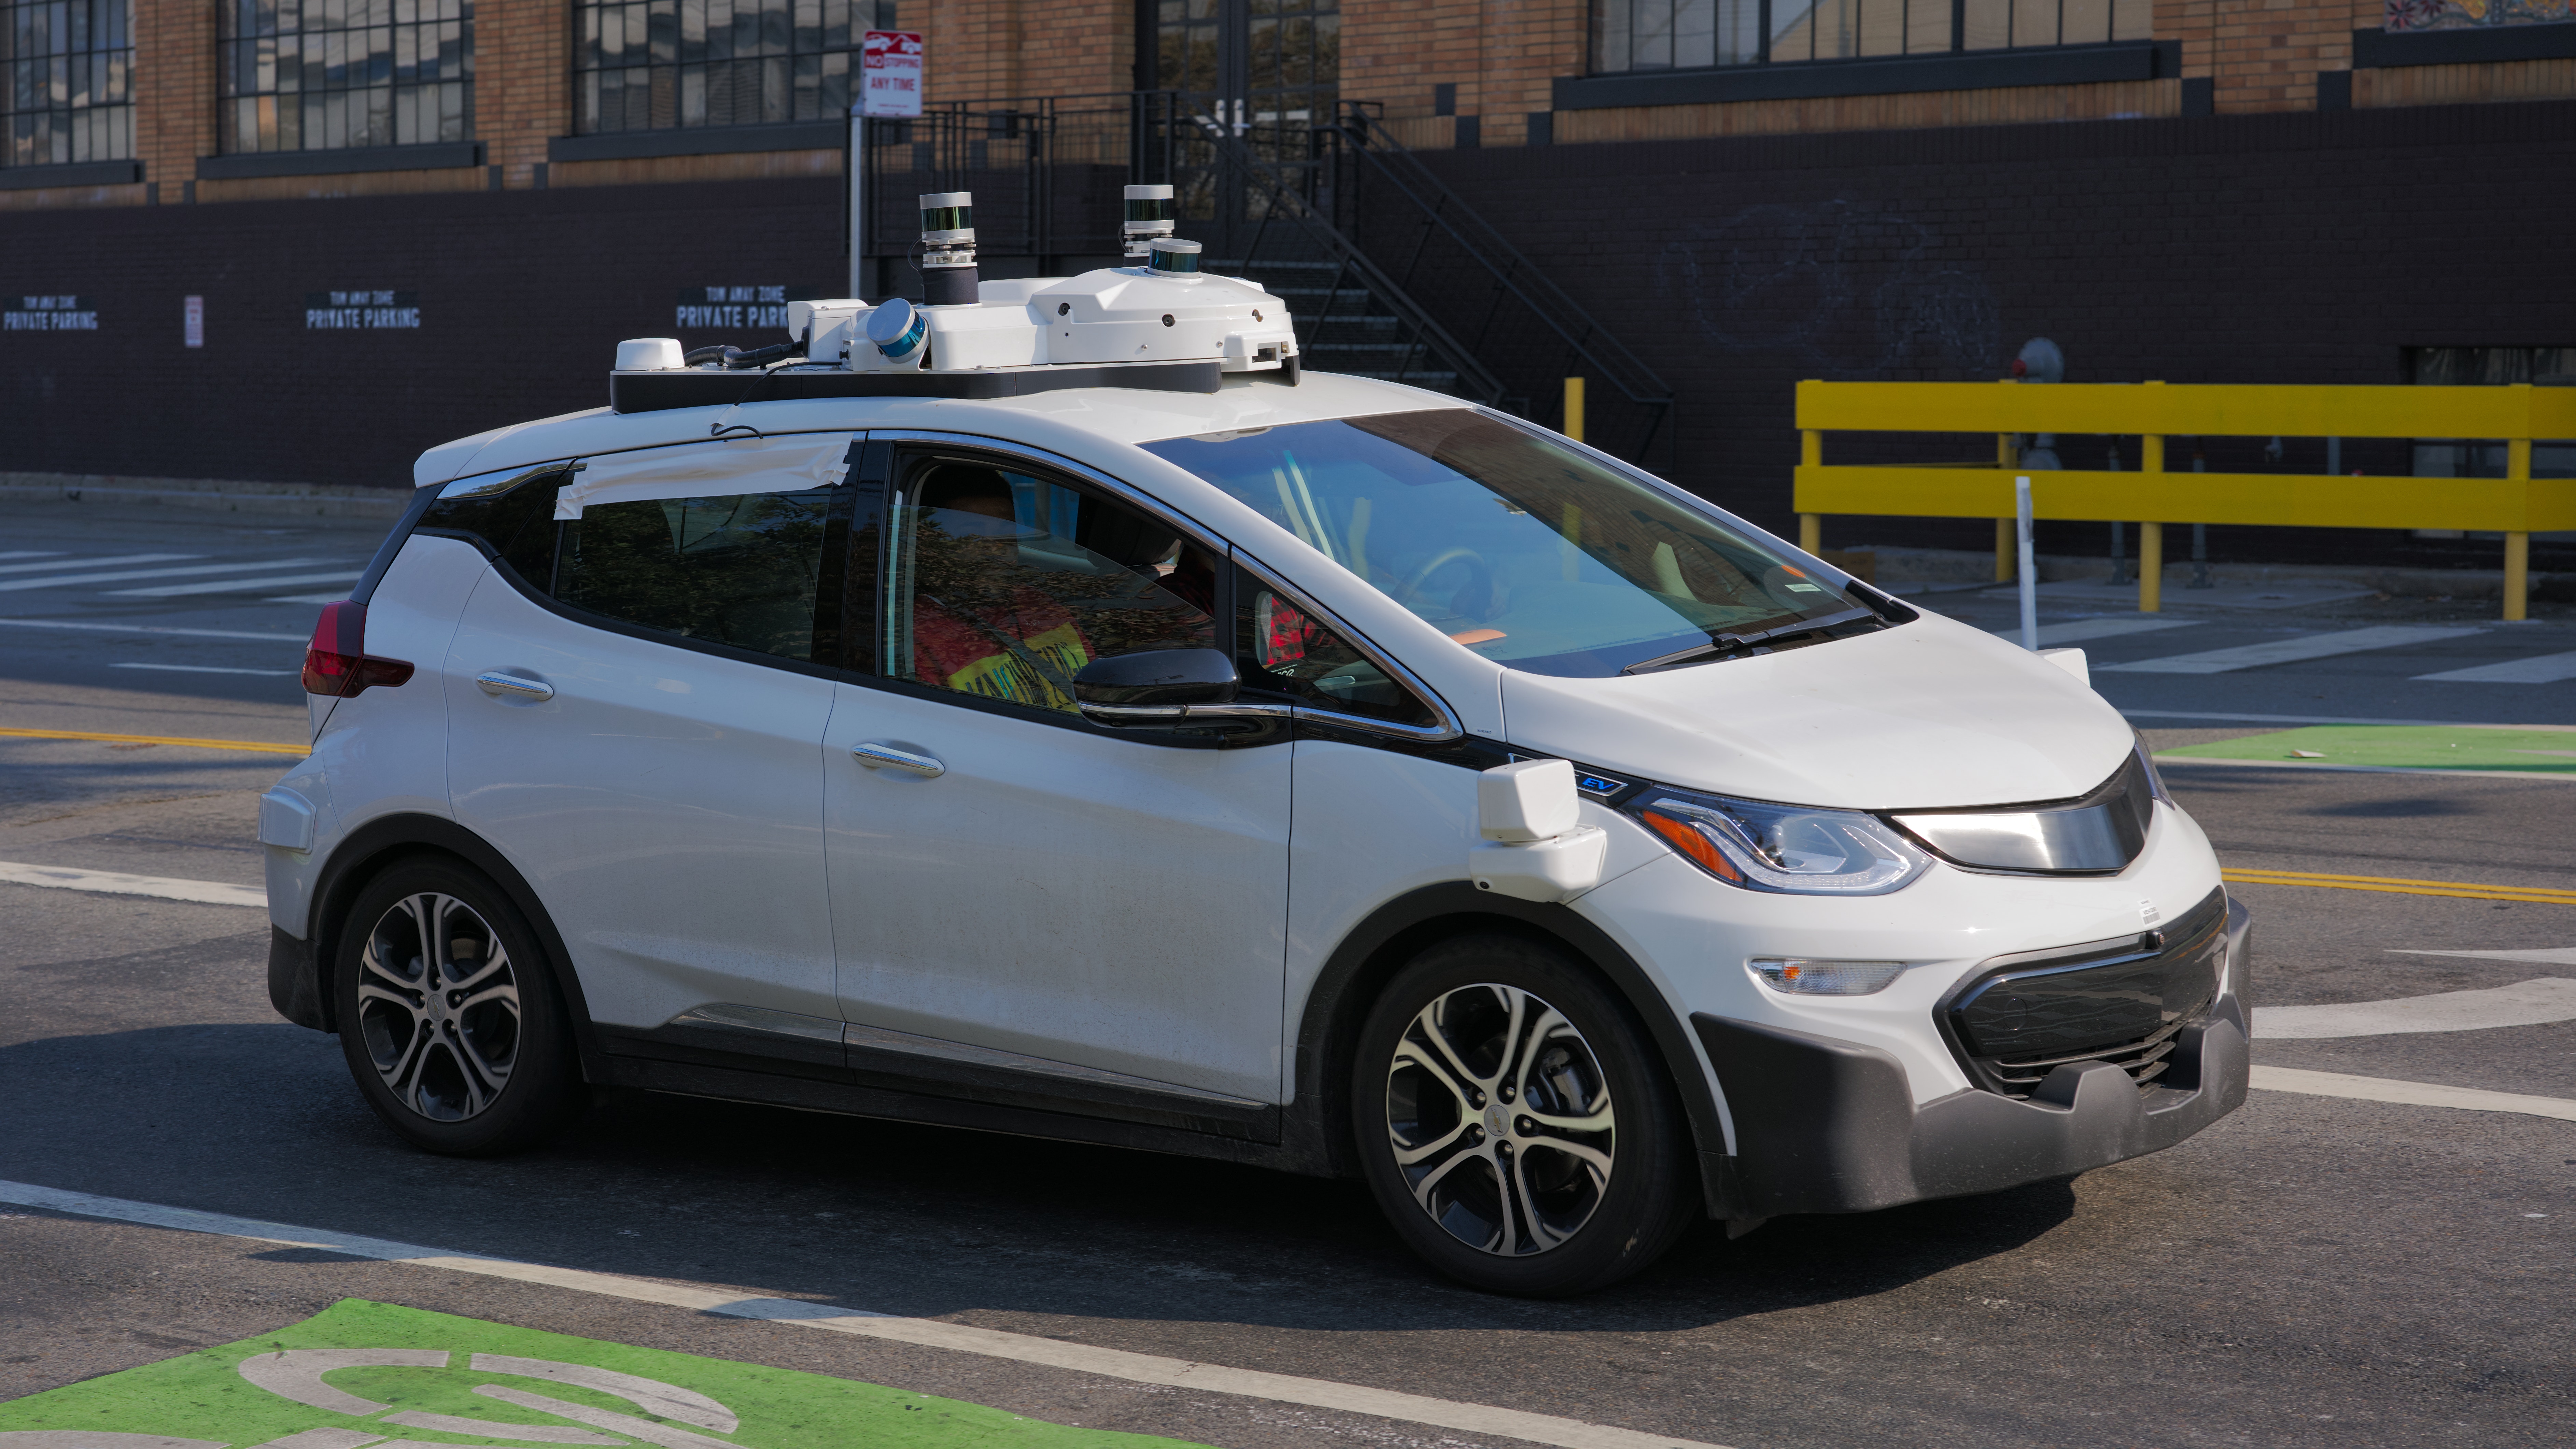 GM's Driverless-Car Unit Cruise Recalls Some Robotaxis Over Software Glitch